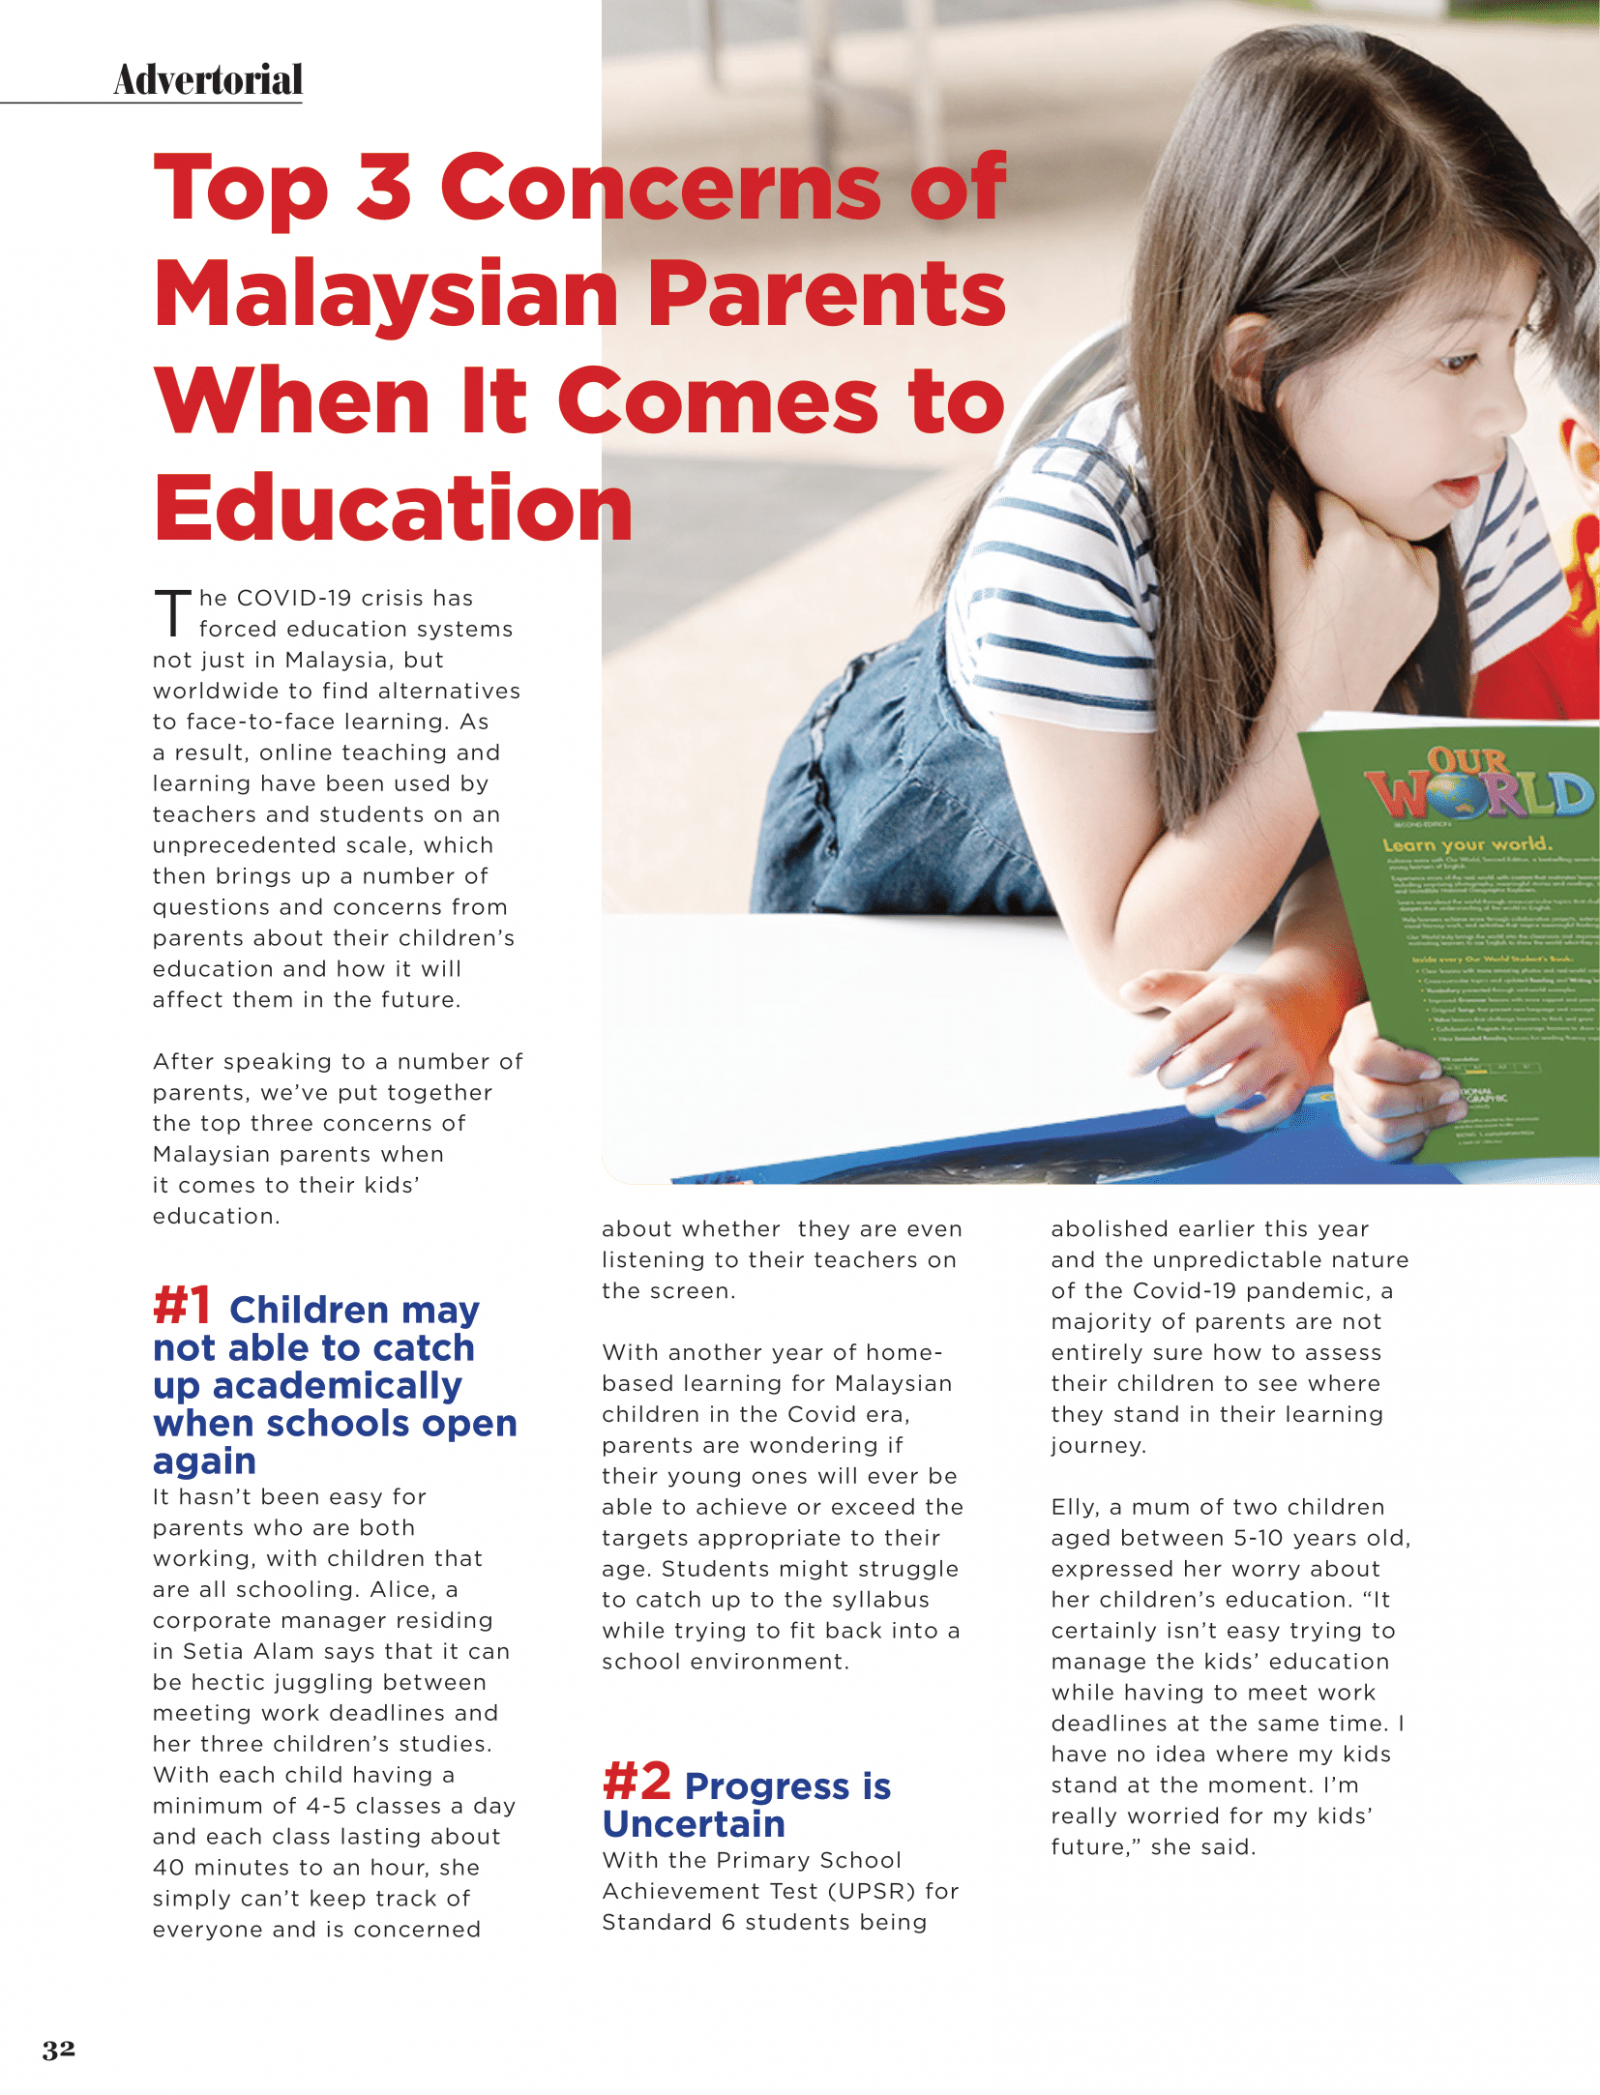 Concerns of Malaysian Parents When It Comes to Education